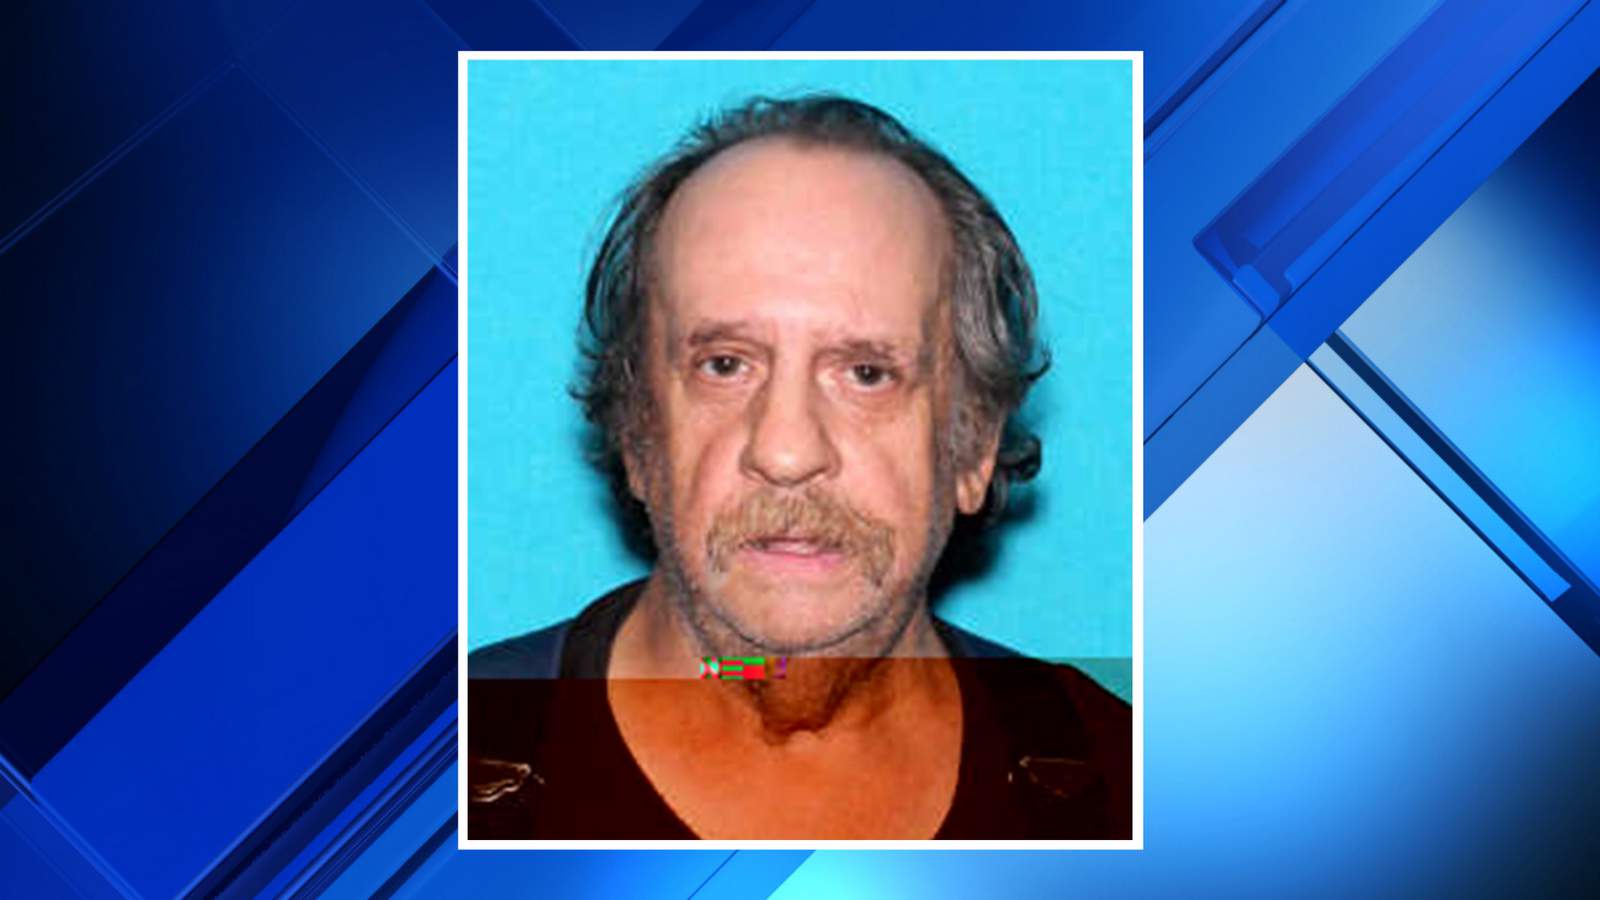 Missing: 74-year-old Roseville man who suffers from dementia